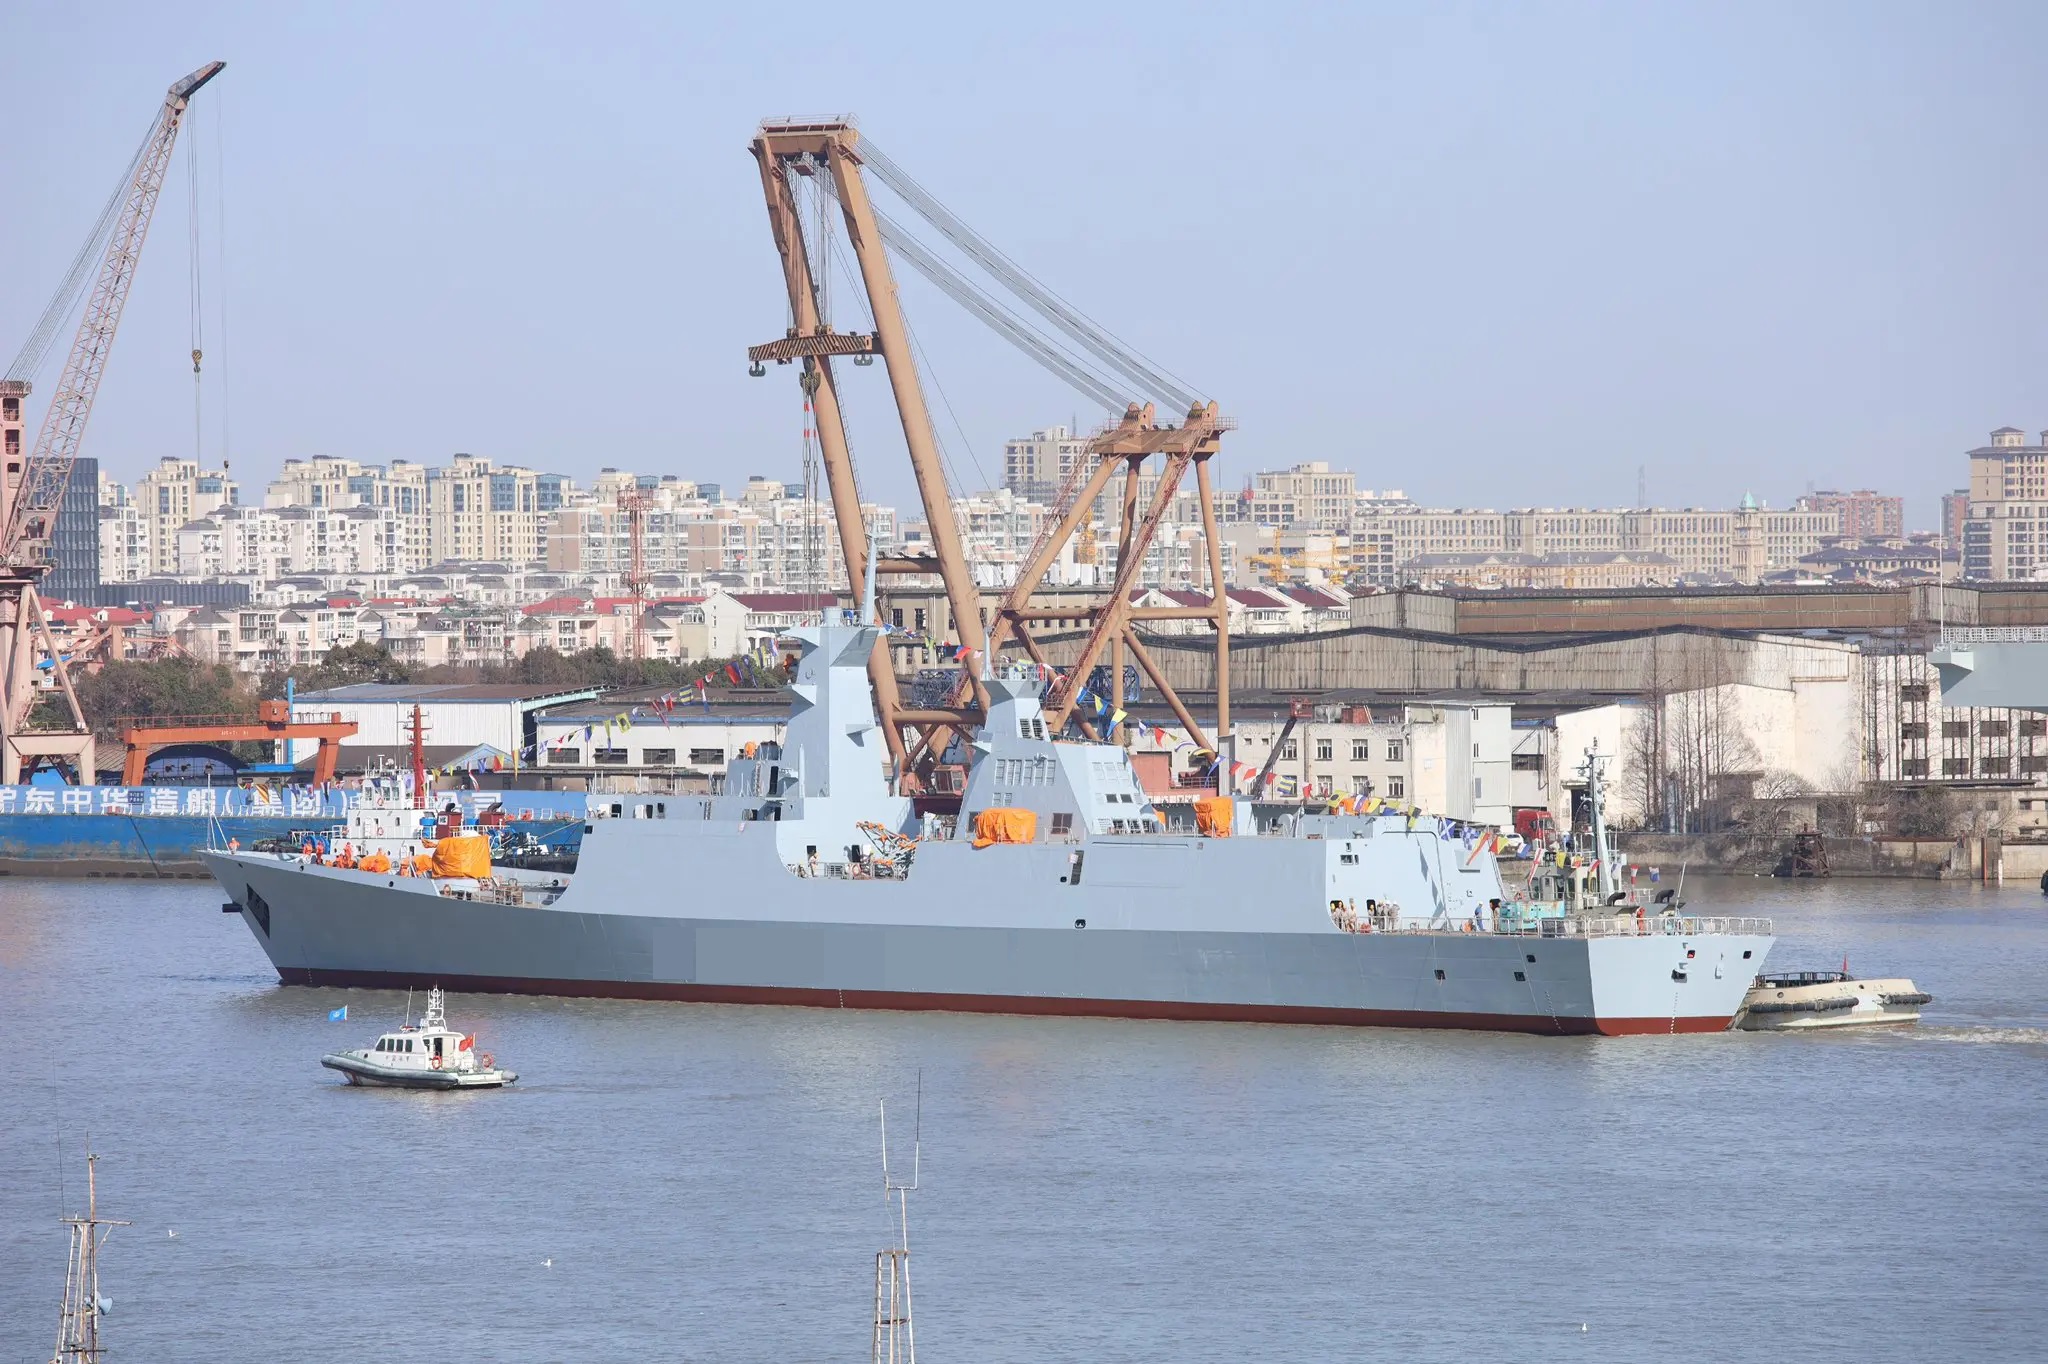 The second Type 054 A/P frigate for Pakistan was launched at the Hudong Zhonghua shipyard in Shanghai.